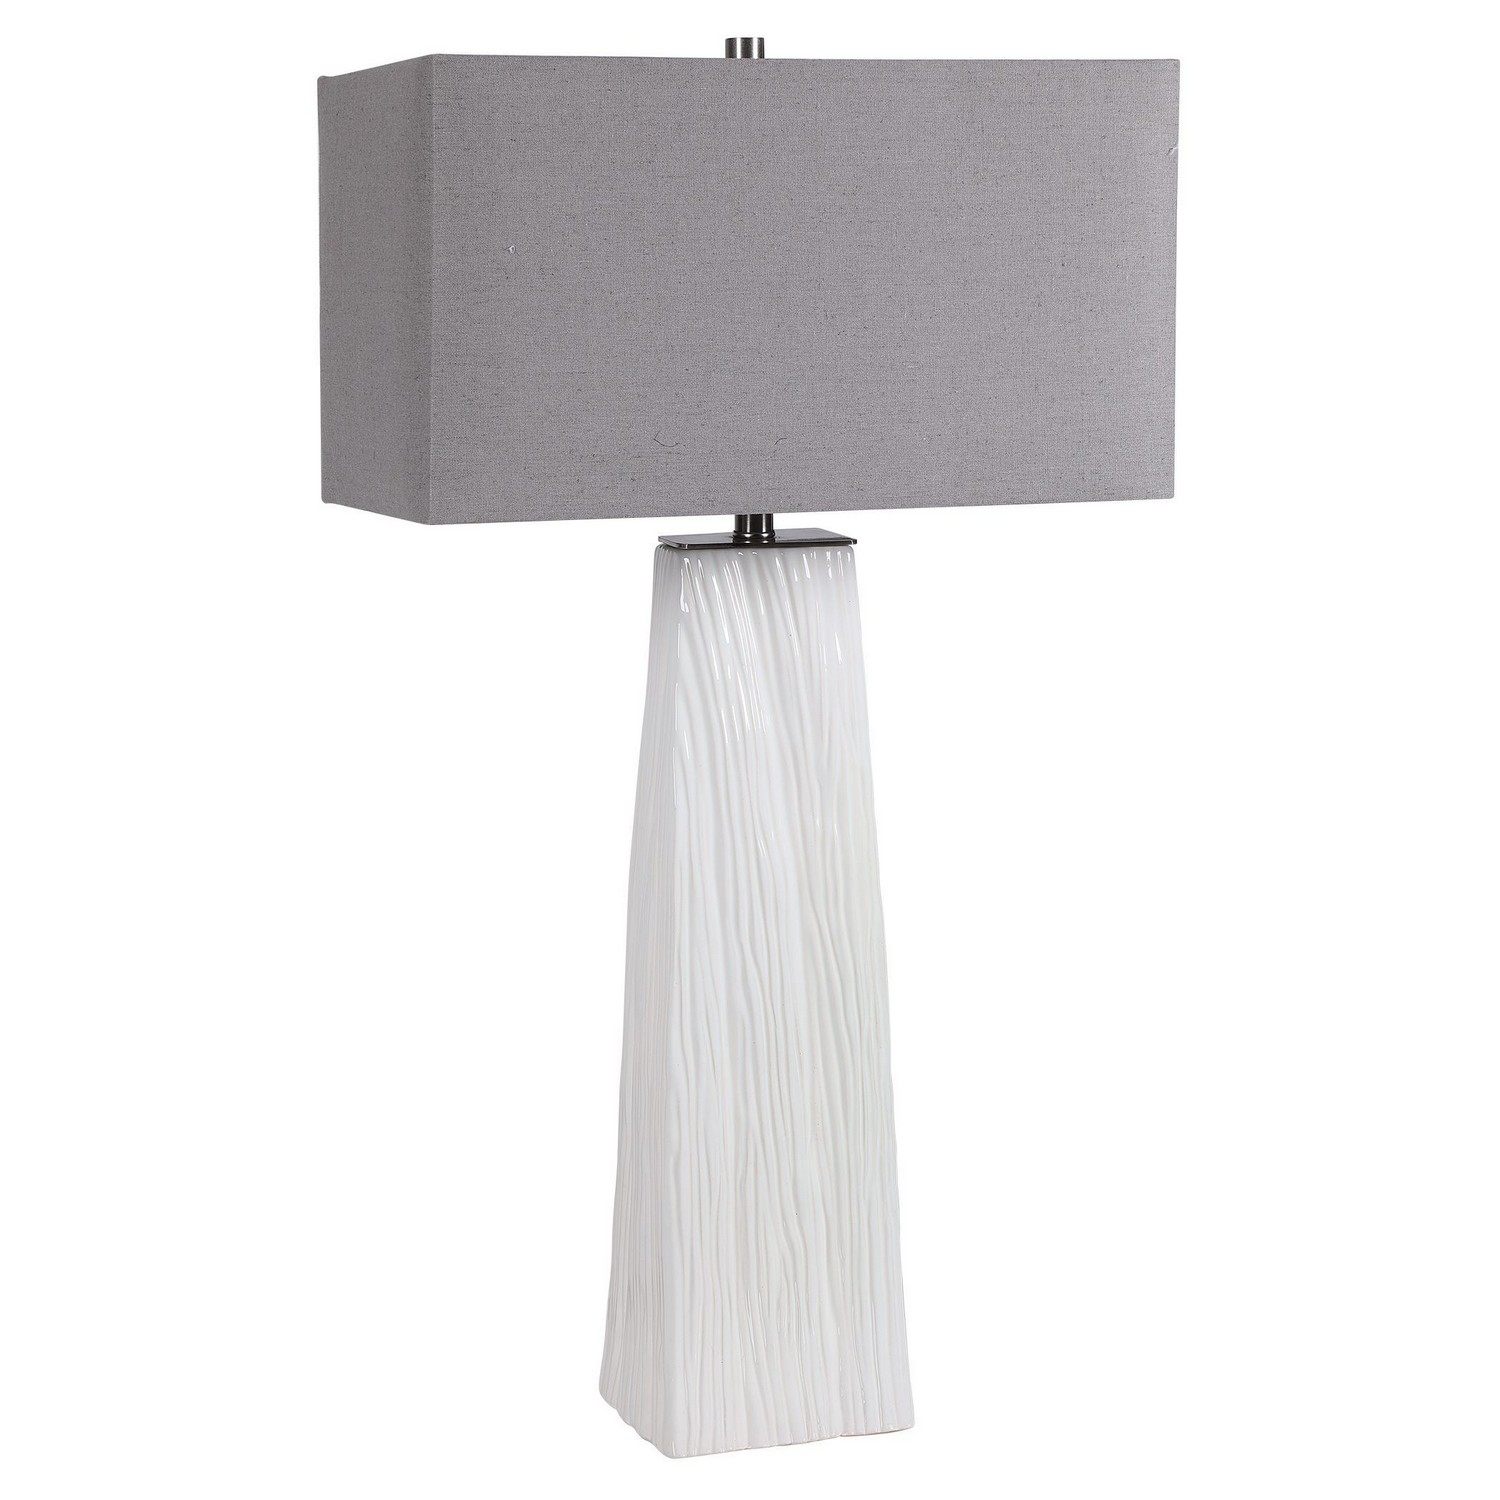 Uttermost Sycamore Table Lamp - White